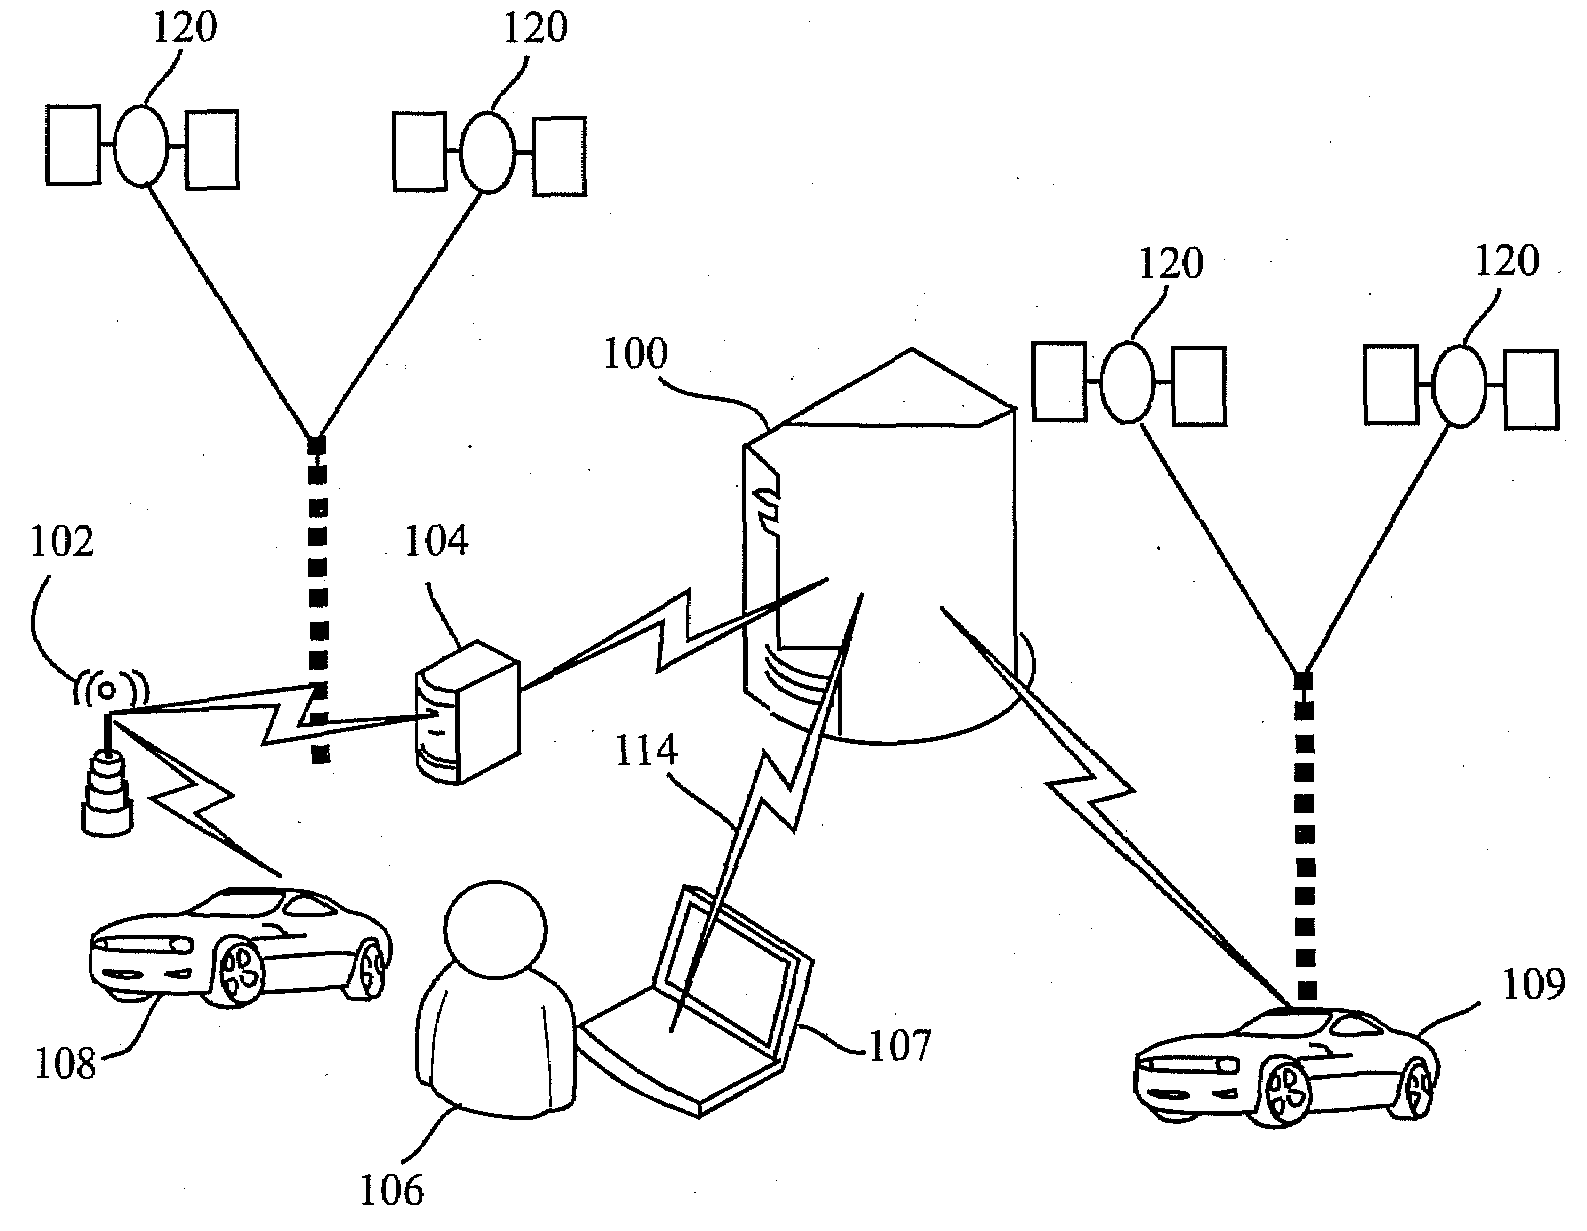 Vehicle-to-vehicle instant messaging with locative addressing